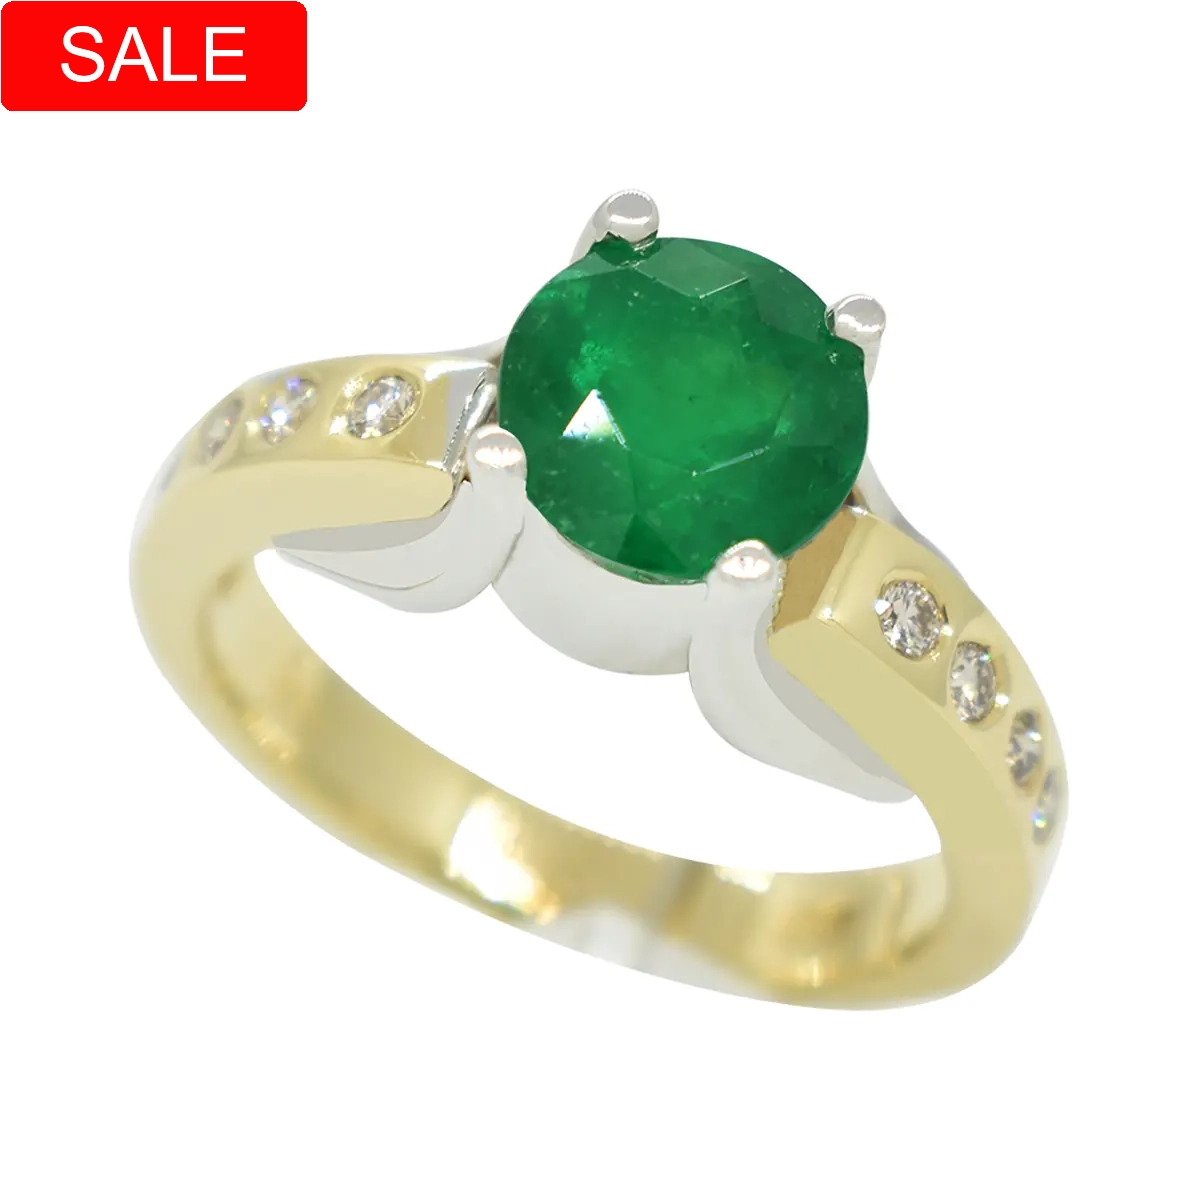 Two-tone emerald and diamond ring in 14K gold with a round-cut emerald set in white gold prongs and eight round-cut diamonds embedded in the yellow gold shank